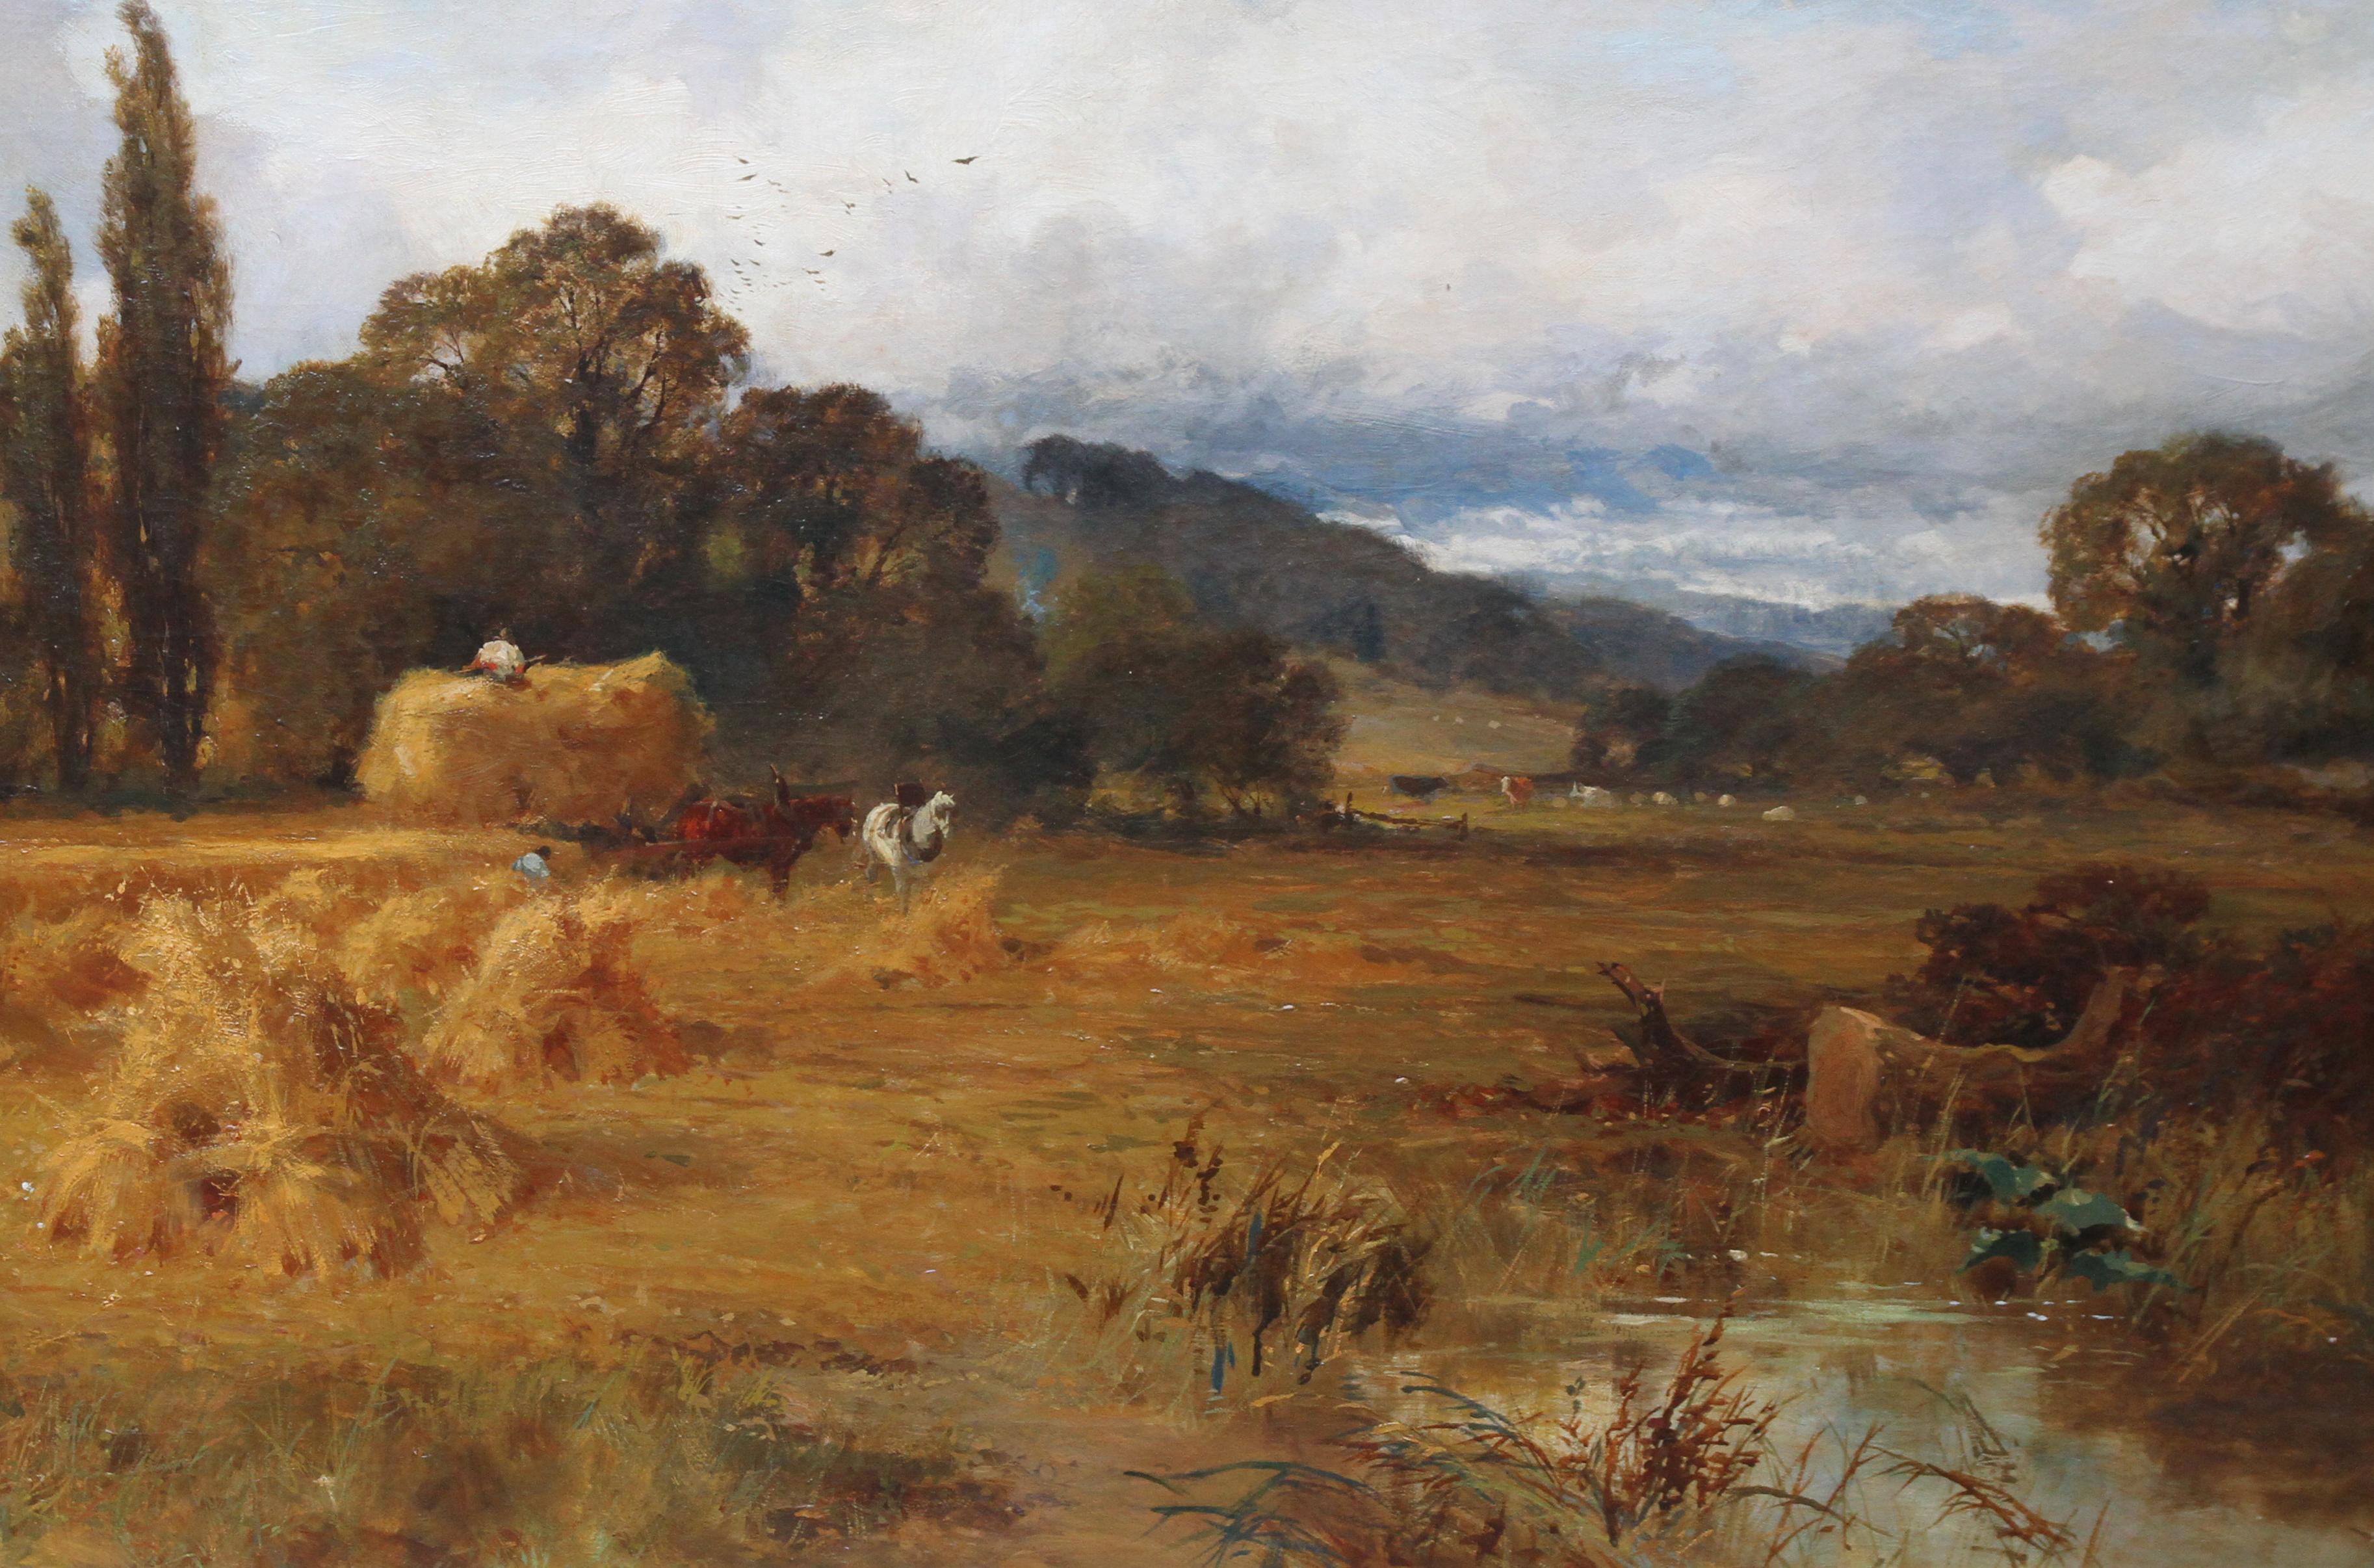 This lovely Victorian landscape oil painting on canvas is by noted exhibited British artist John Horace Hooper. Hooper was particularly known for his landscapes and was fond of the subject of harvests. This lovely painting, painted around 1880, is